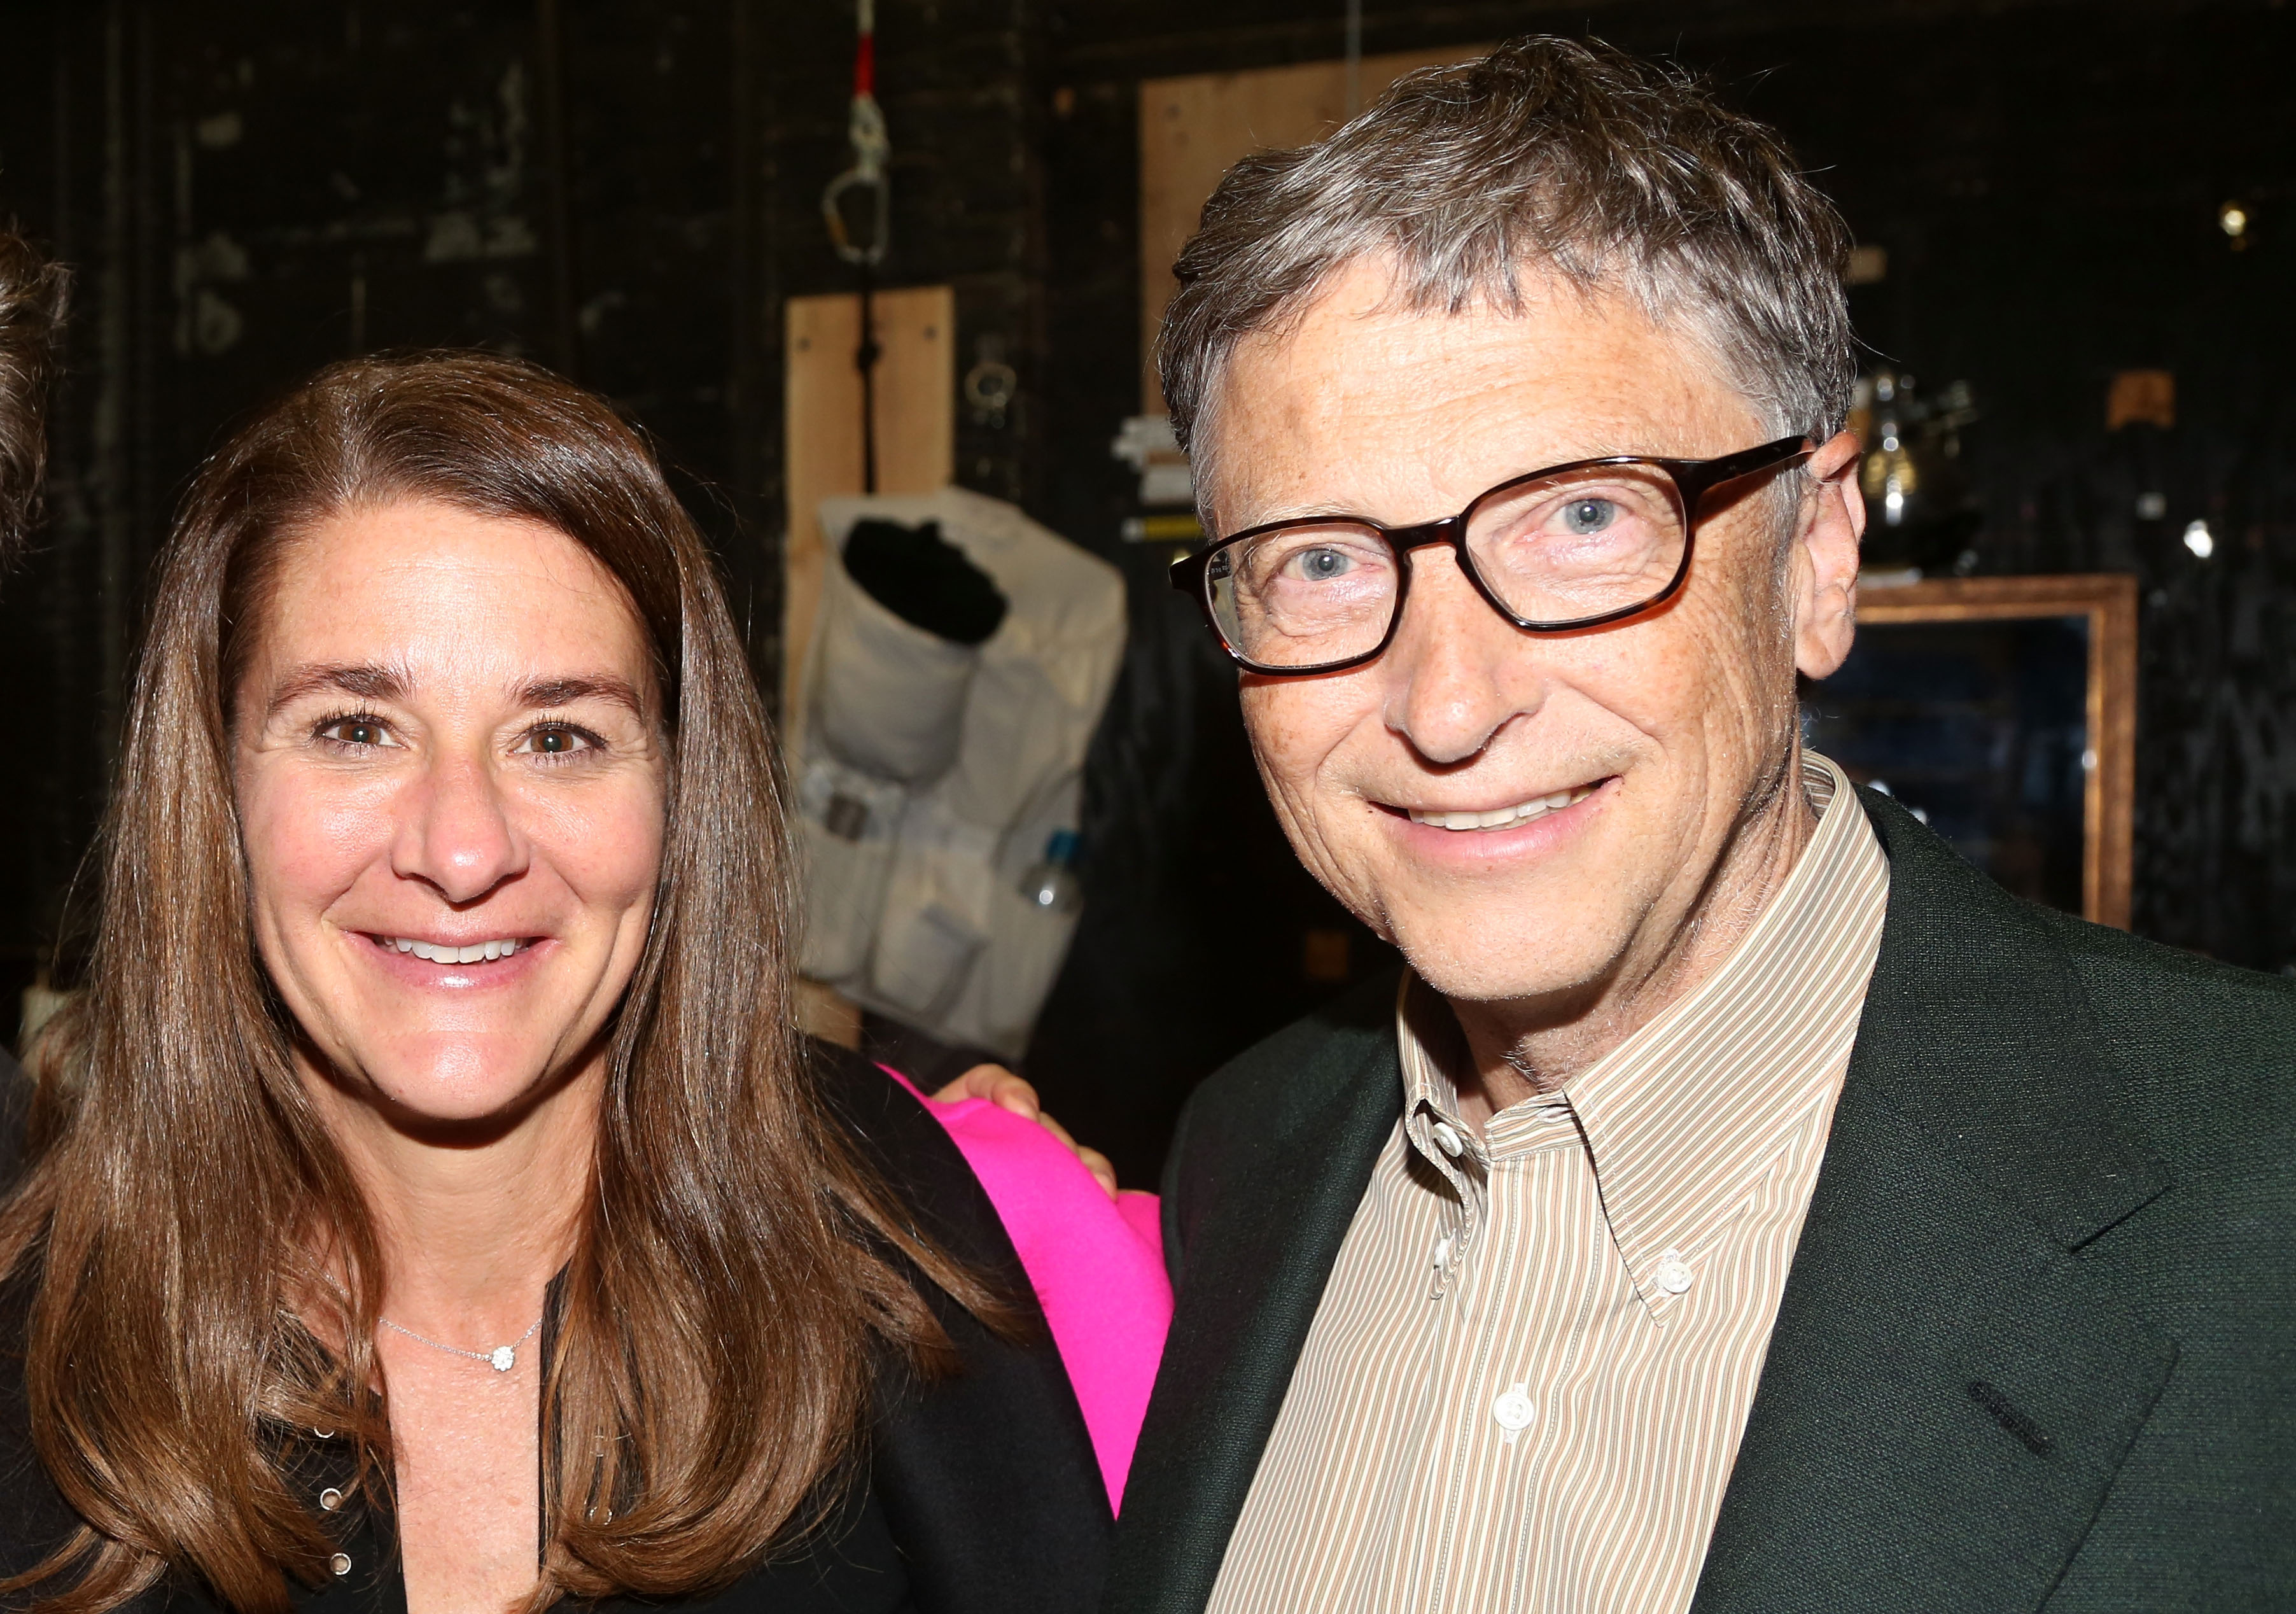 Melinda Gates and husband Bill Gates pose backstage at the hit musical 'Hamilton' on Broadway at The Richard Rogers Theater on October 11, 2015 in New York City.